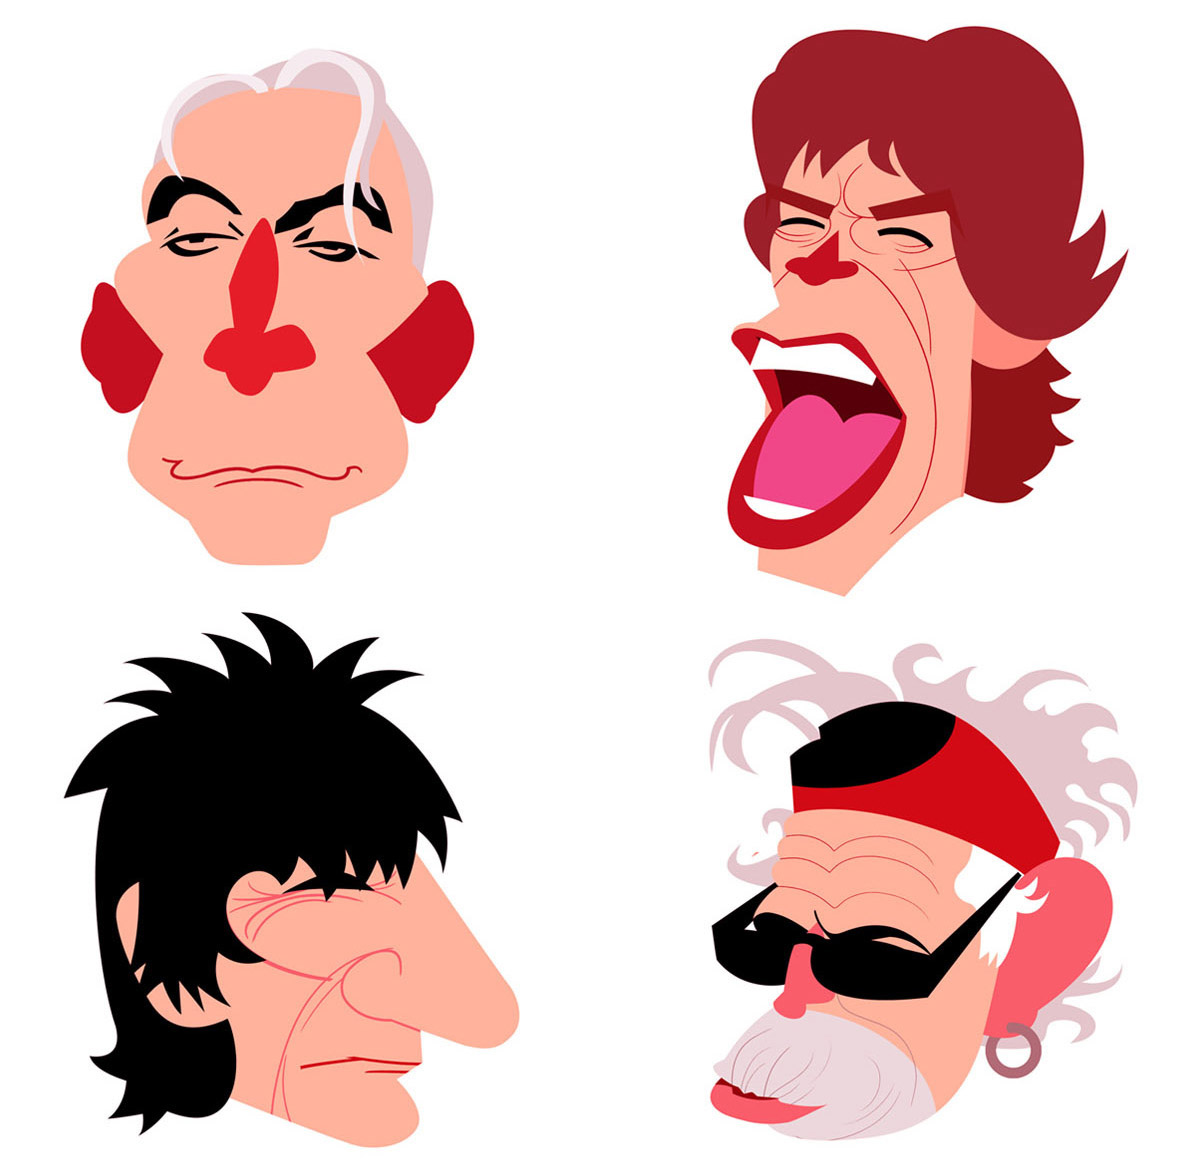 Adobe Portfolio caricature   the rolling stones band sixties rock rocknroll Mick Jagger Keith Richards charlie watts ronnie wood